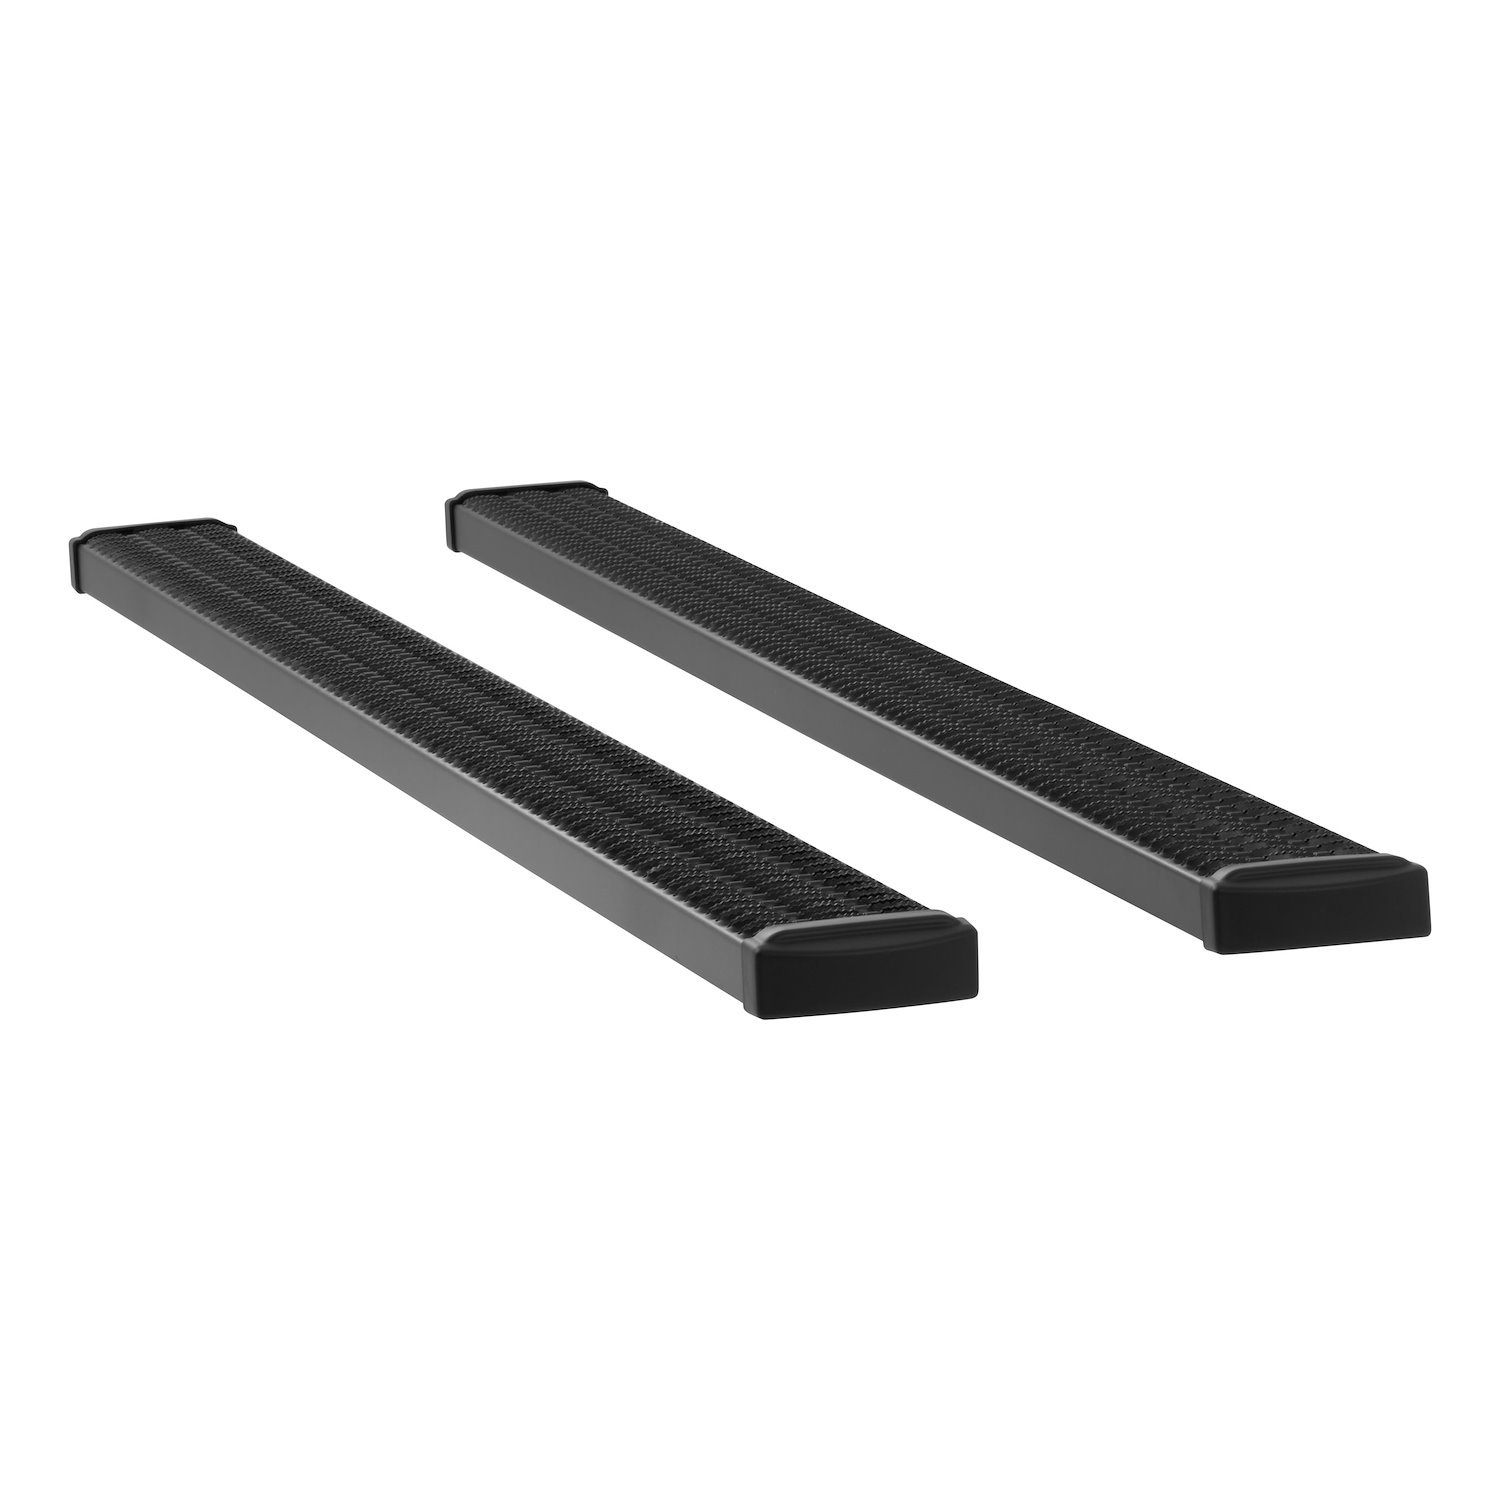 415098-401338 Grip Step 7 in. x 98 in. Aluminum Wheel-to-Wheel Running Boards Fits Select Ram 3500